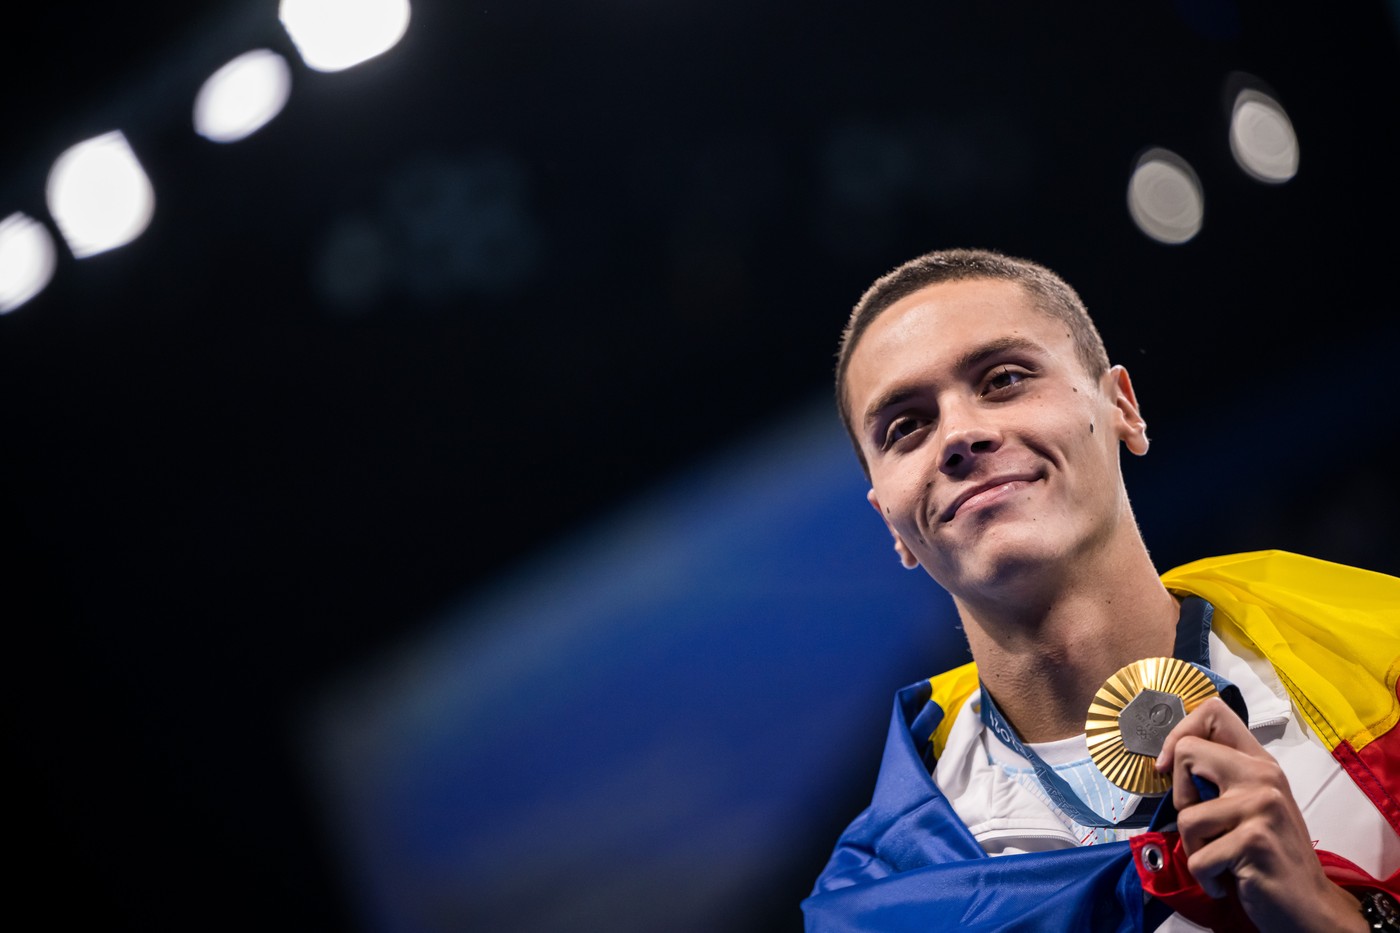 240729 David Popovici of Romania celebrates on the podium after winning the men’s 200 meters freestyle swimming final during day 3 of the Paris 2024 Olympic Games on July 29, 2024 in Paris. 
Photo: Maxim Thore / BILDBYRÅN / kod MT / MT0629
simning swimming svømming olympic games olympics os ol olympiska spel olympiske leker paris 2024 paris-os paris-ol 3 bbeng jube,Image: 893857412, License: Rights-managed, Restrictions: Sweden, Norway, Finland and Denmark must be OUT, Model Release: no